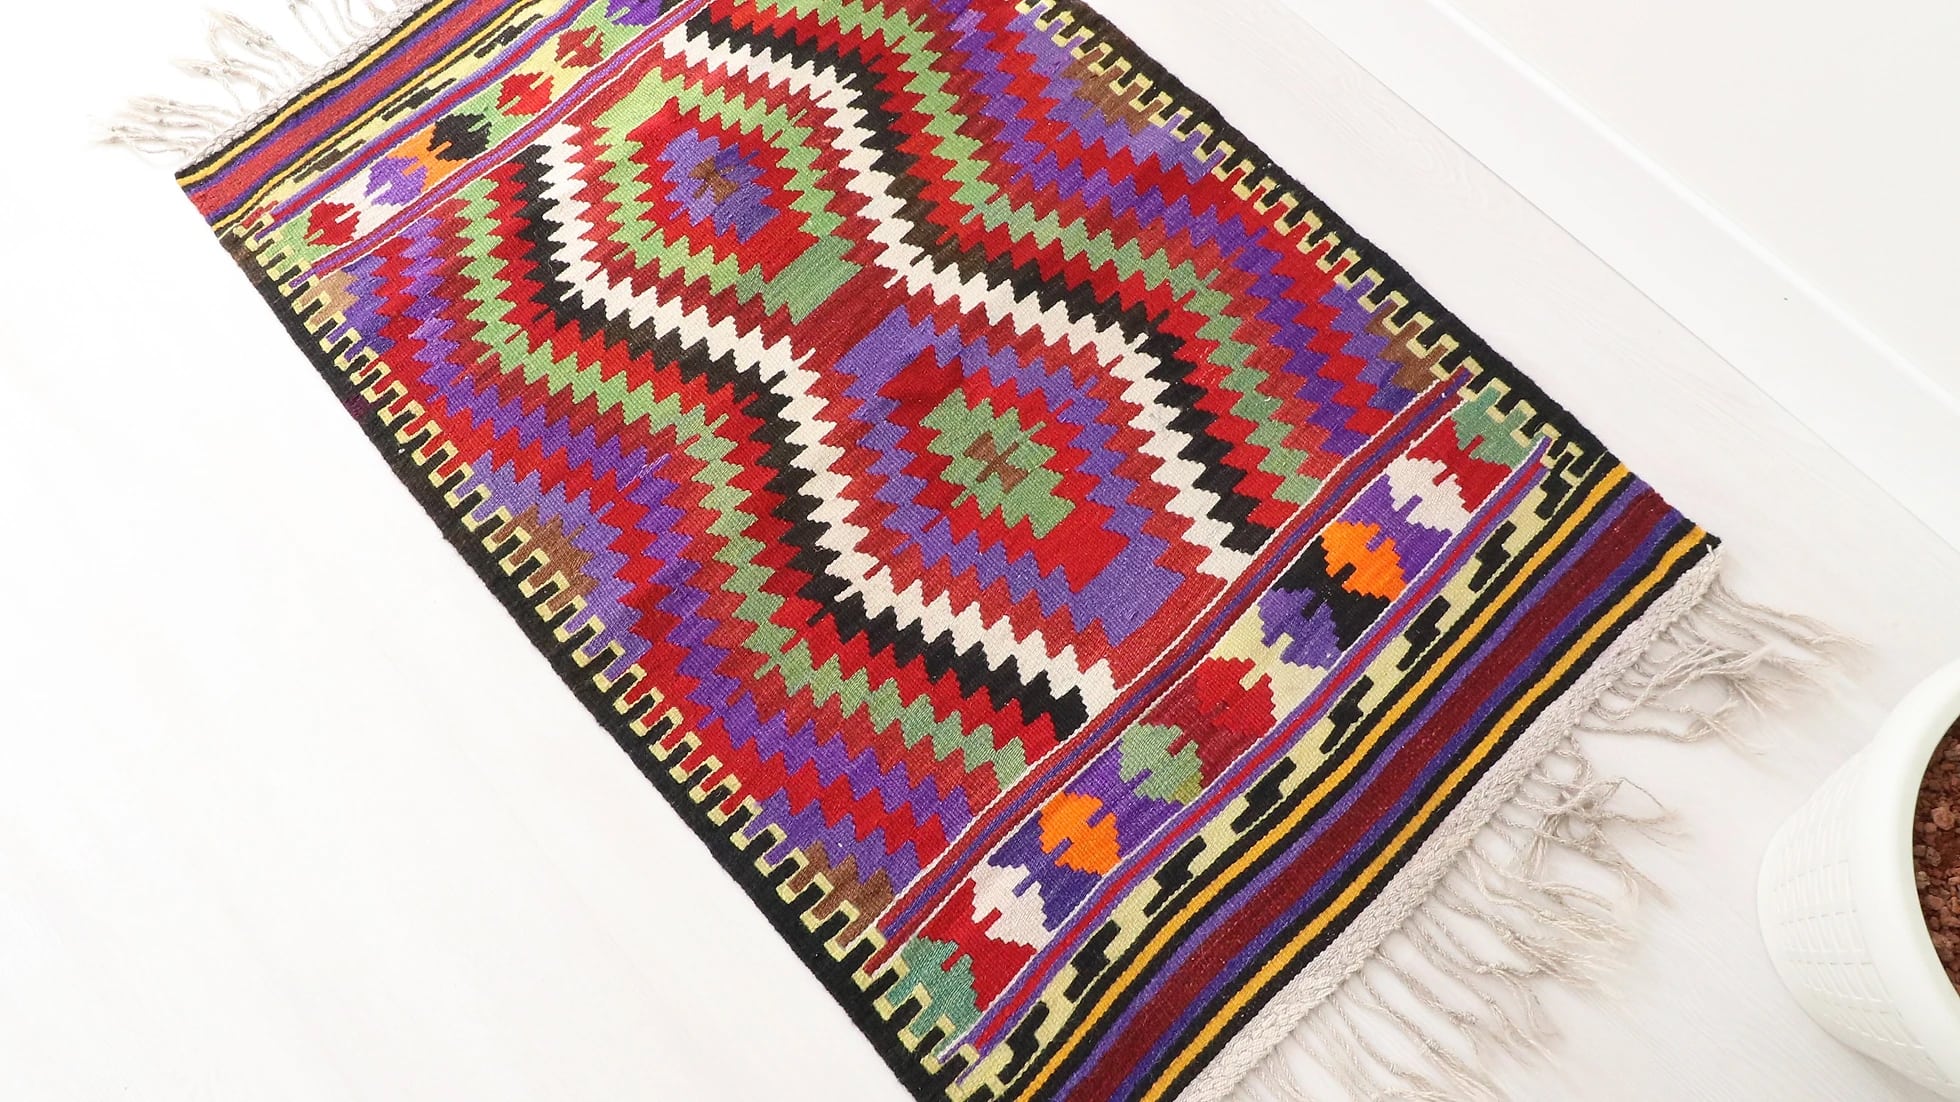 vivid and vibrant small flat-weave area rug from Antalya showcasing colorful and contemporary traditional Anatolian kilim motifs